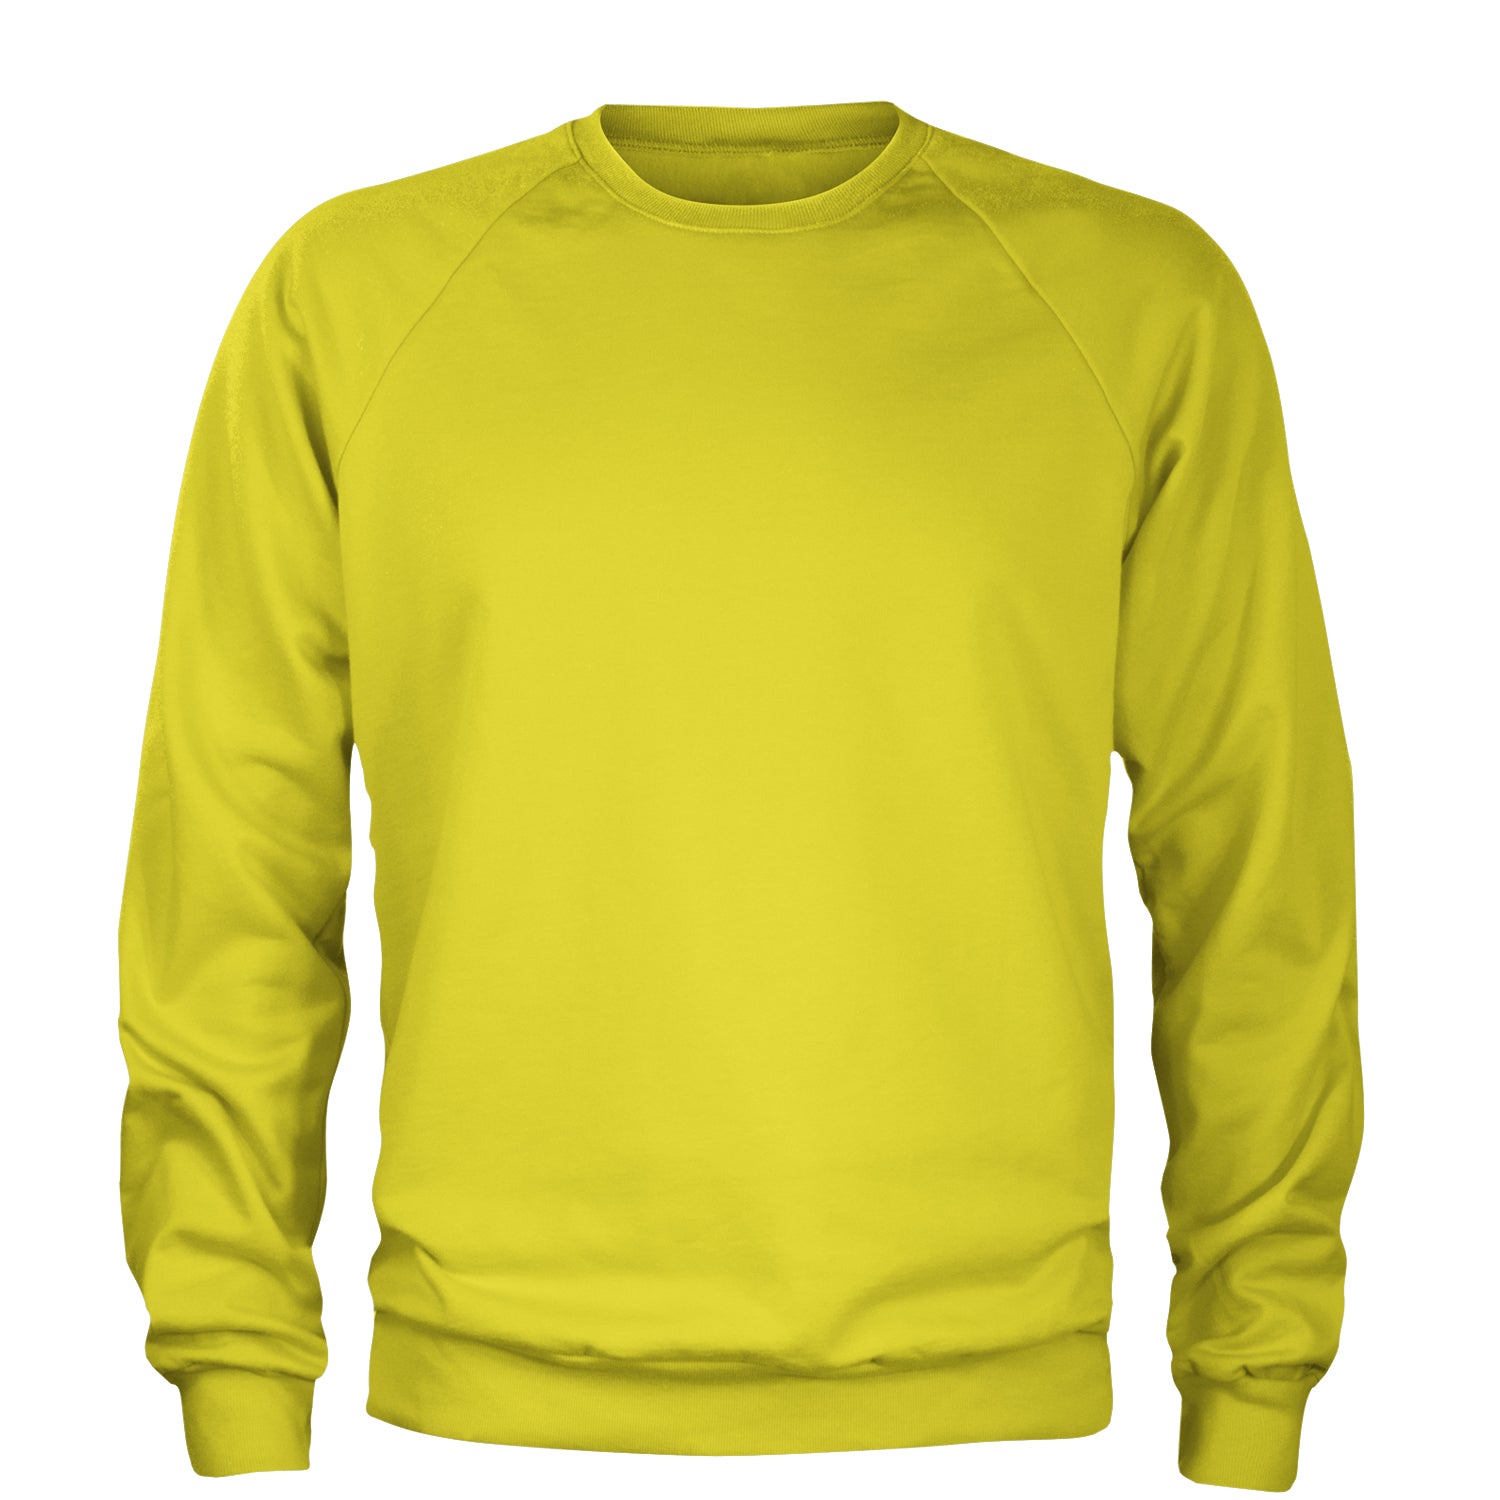 Custom Crewneck Sweatshirts For Adults & Kids create your own, custom, CustomClothing, customized, personalized by Expression Tees